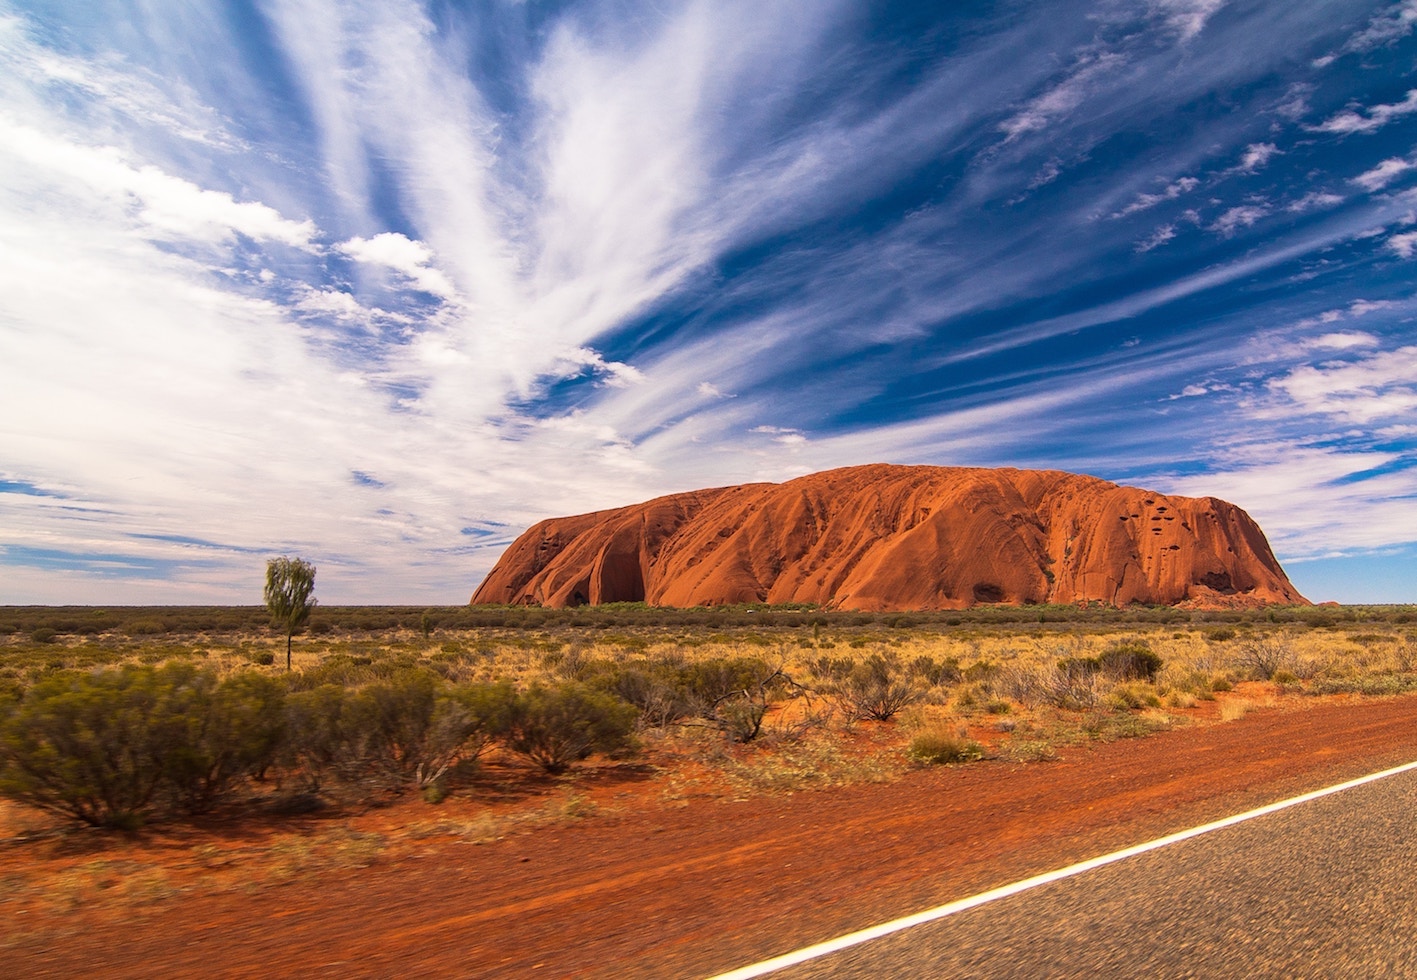 Travelling to Ayers Rock in Australia on a budget. Embrace the beauty of Nature and magnificent Australia #Australia #ayersrock #travel #traveller #wanderlust